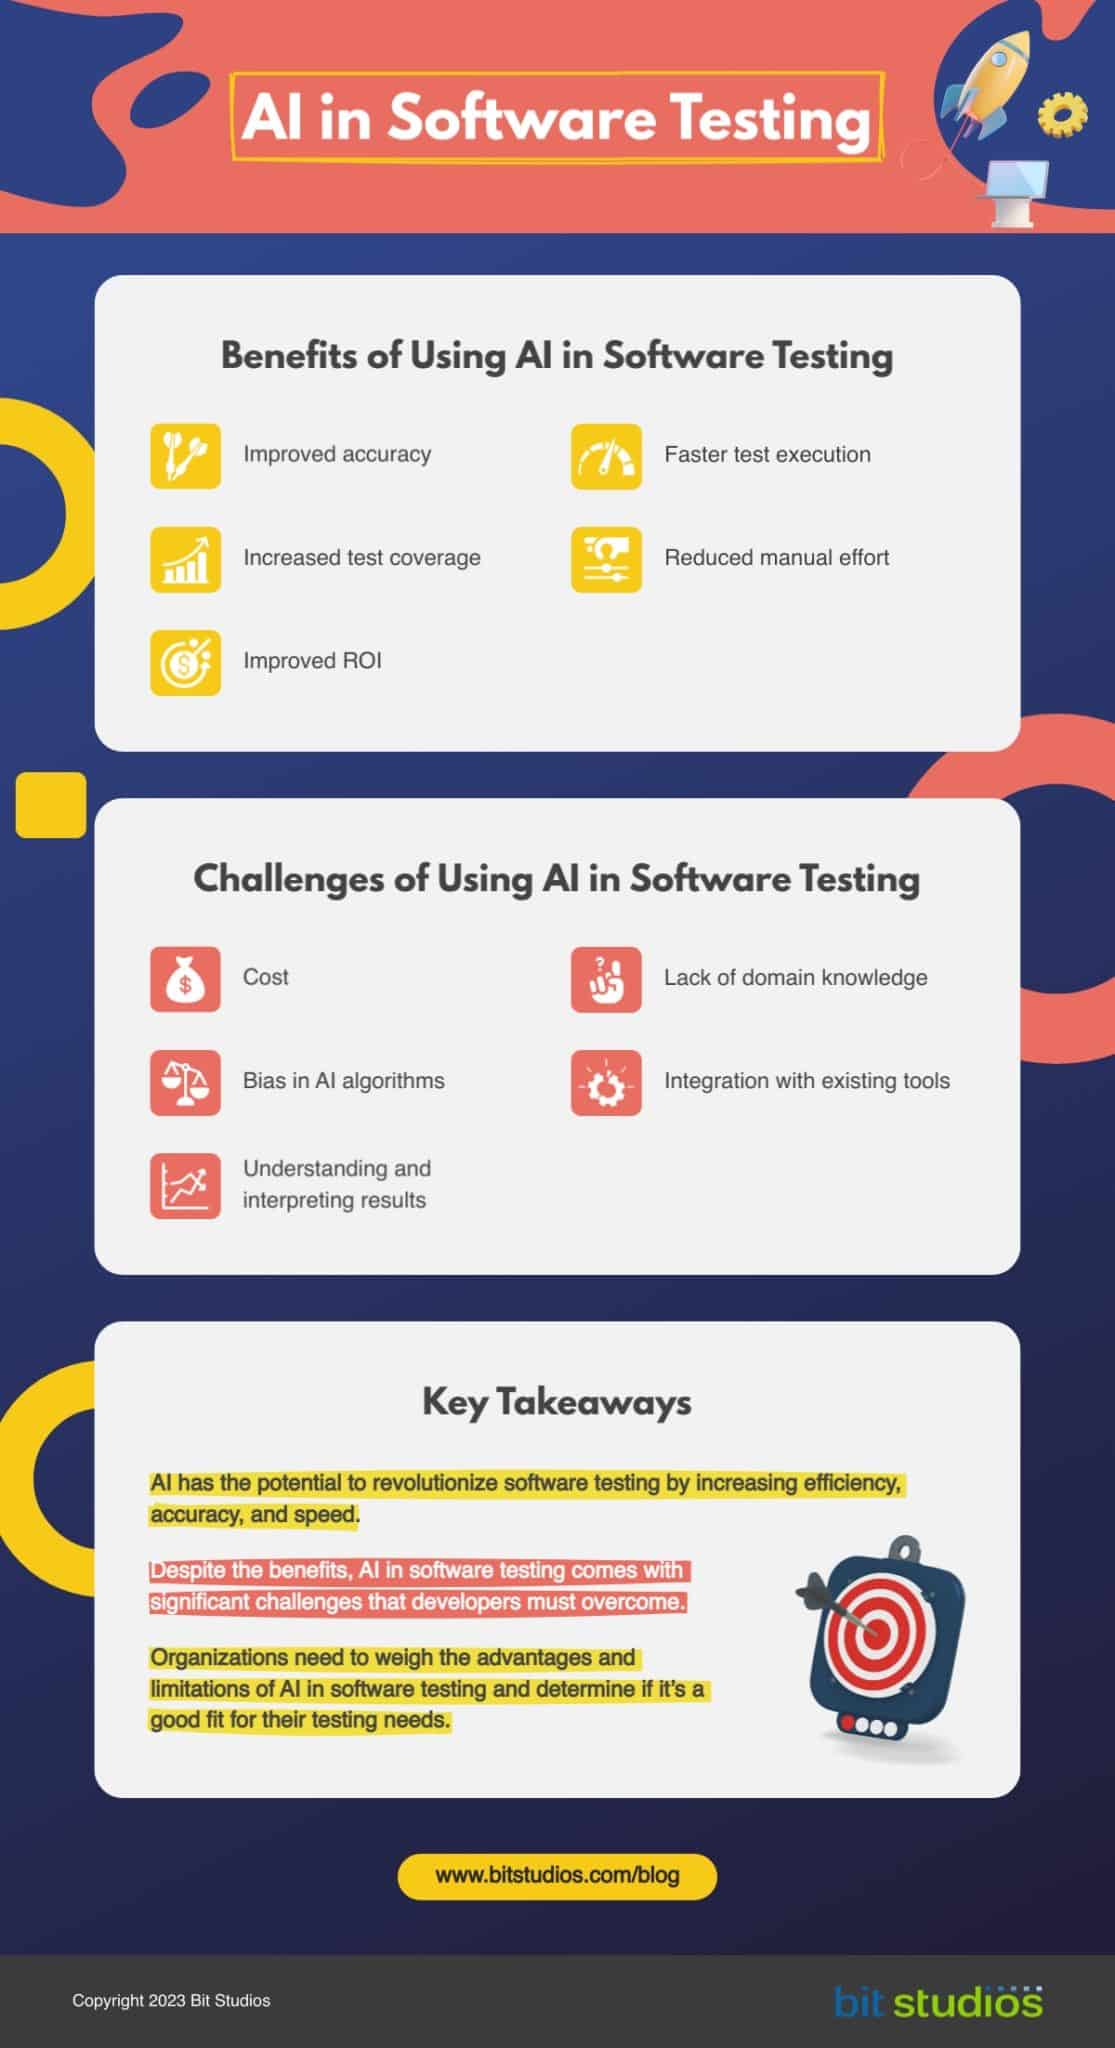 How to Use AI in Software Testing - BIT Studios